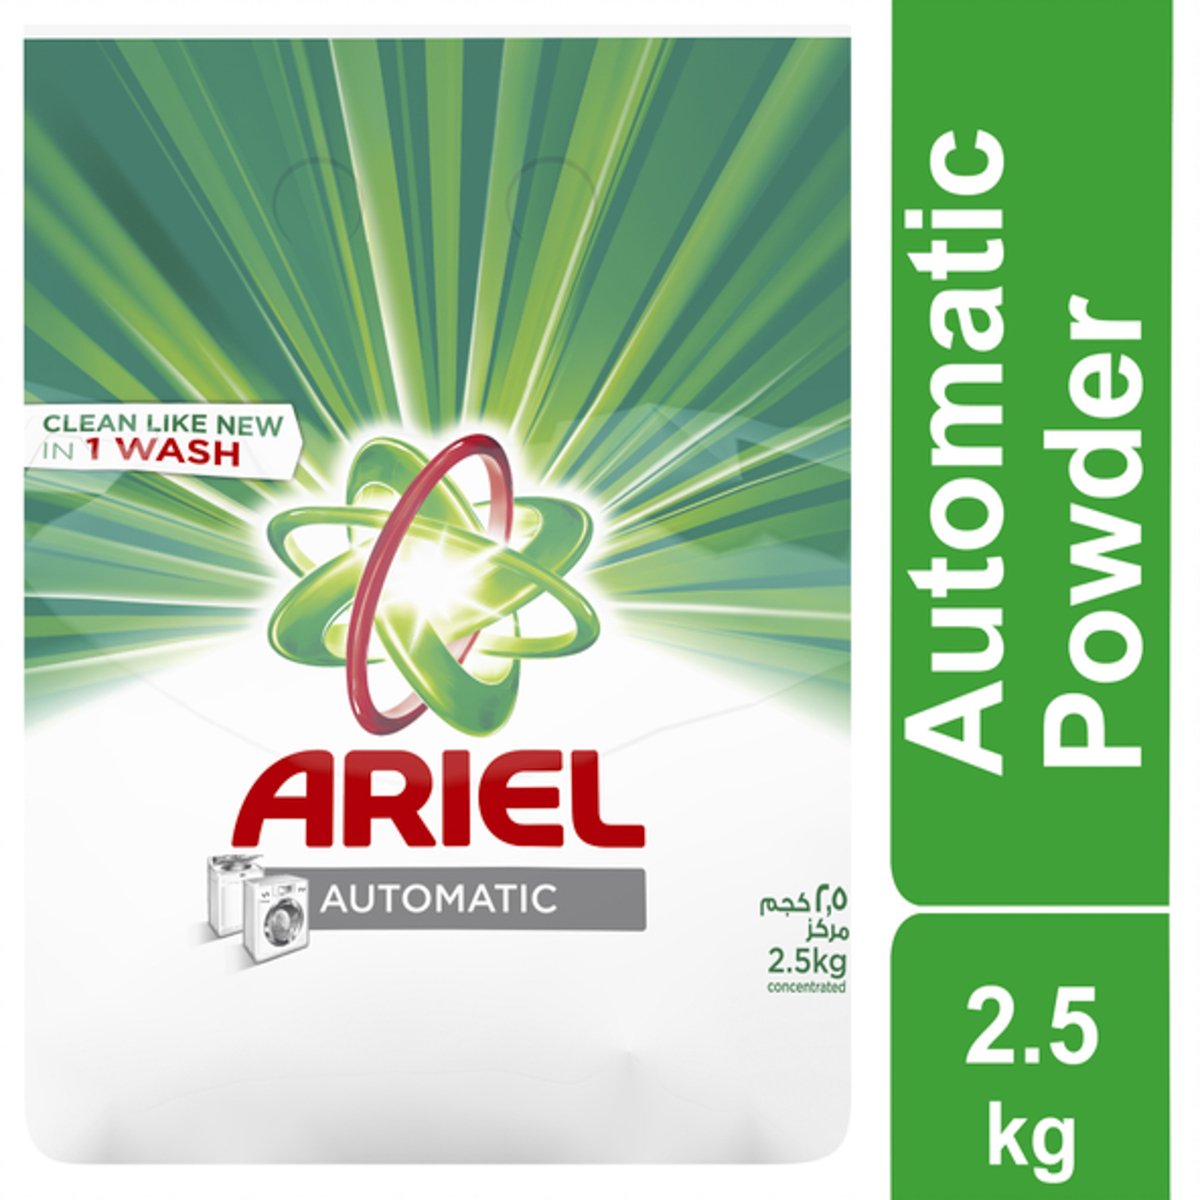 Buy Ariel Automatic Washing Powder 2.5kg Online at Best Price | Front load washing powders | Lulu Egypt in Egypt